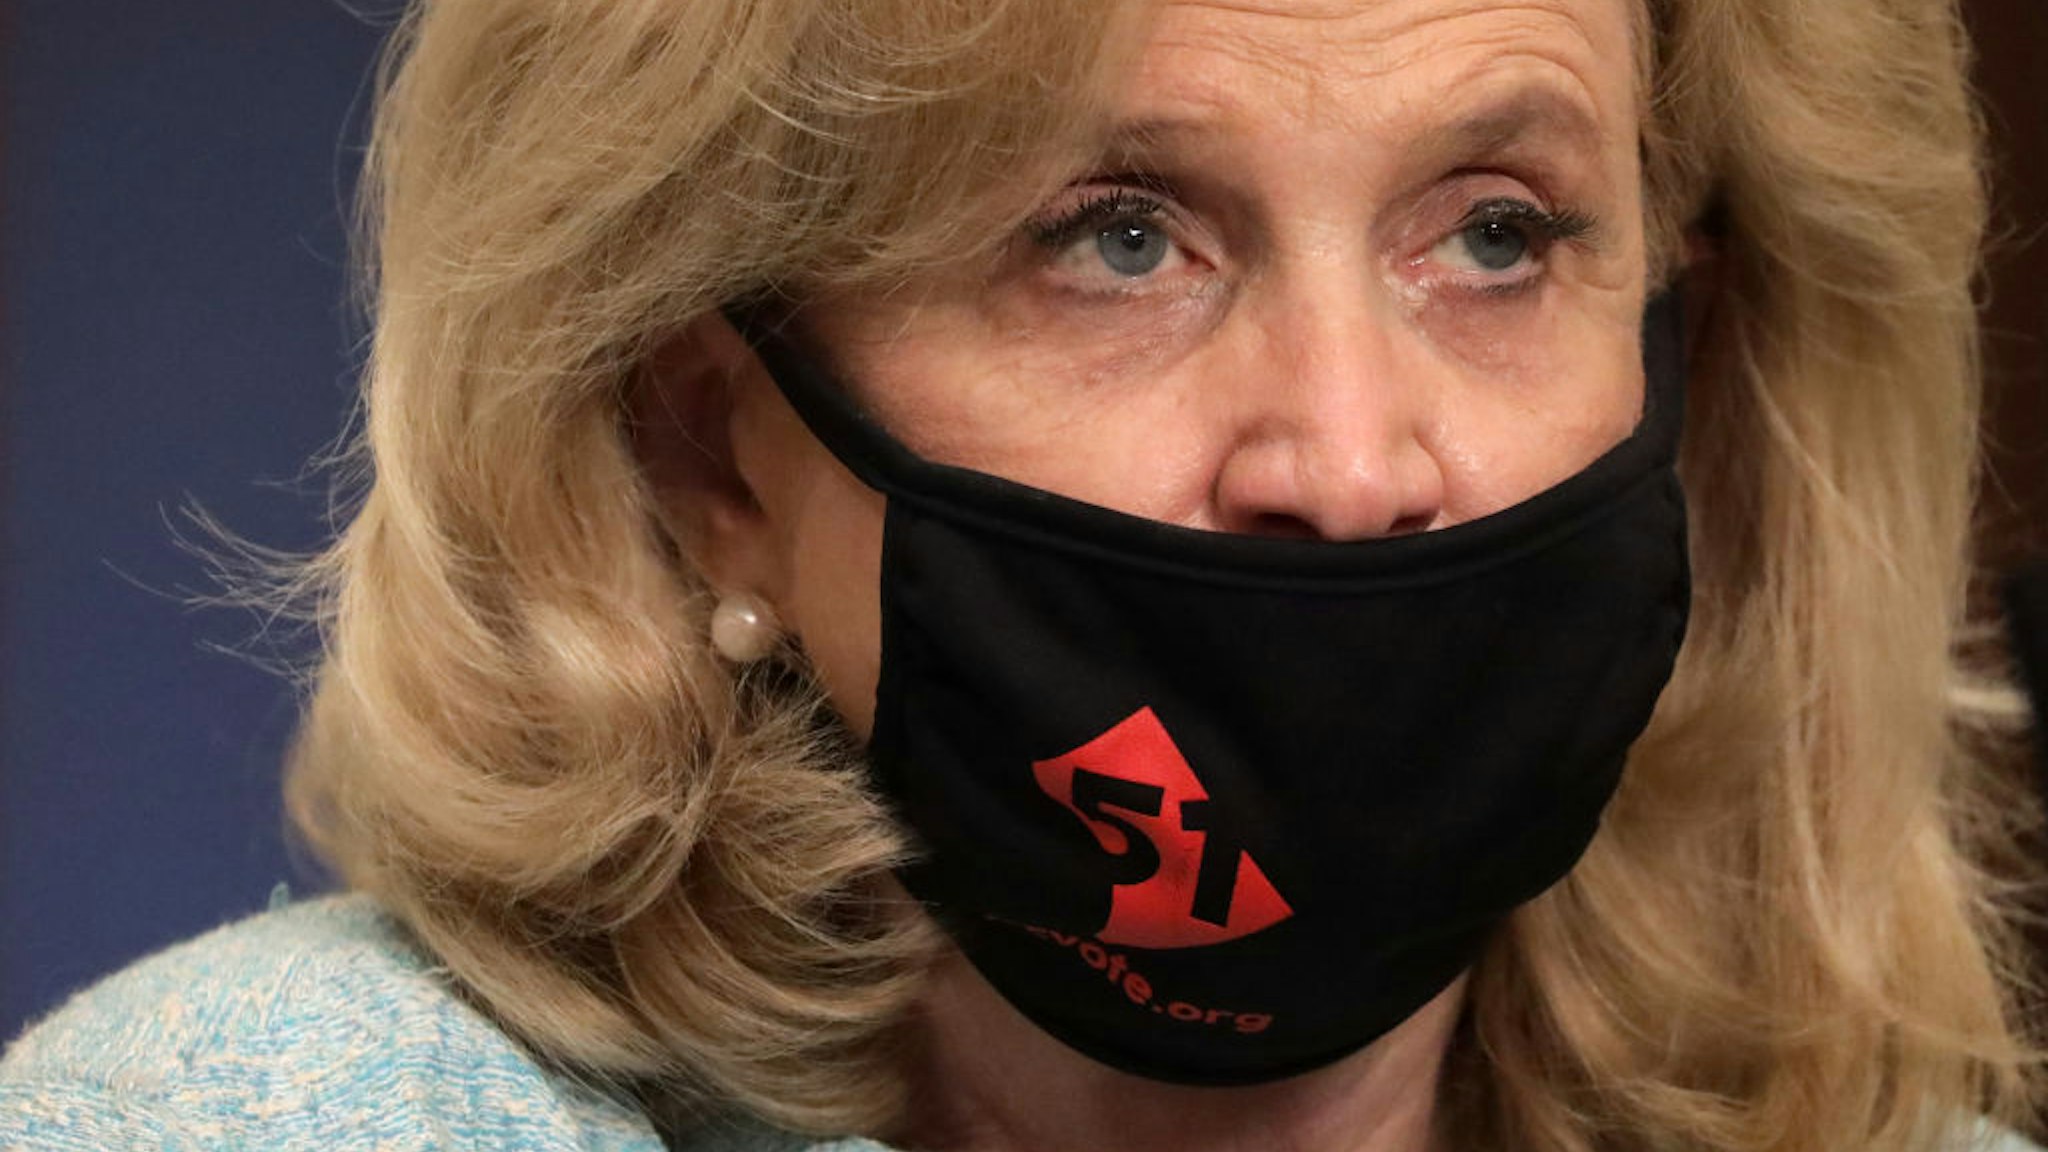 U.S. Rep. Carolyn Maloney (D-NY) wears a DC Vote mask as she waits for the beginning of a hearing before the Coronavirus Crisis Subcommittee of House Oversight and Reform Committee June 26, 2020 on Capitol Hill in Washington, DC.